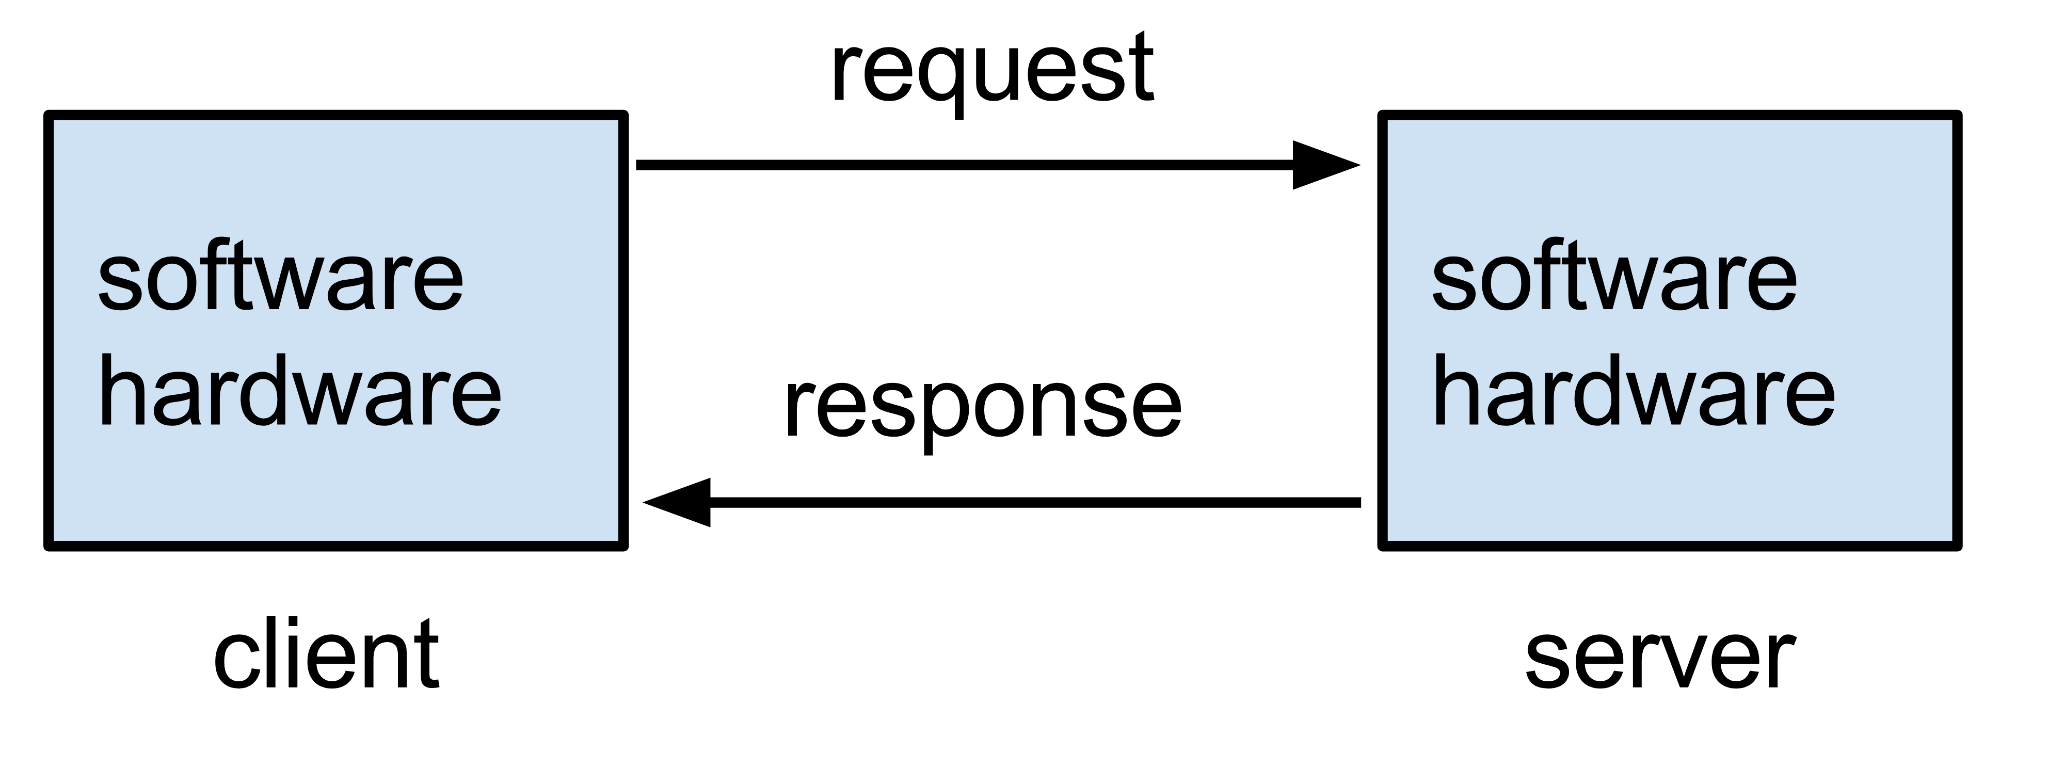 Image of a client sending a request to the server, and receiving a response from the server.